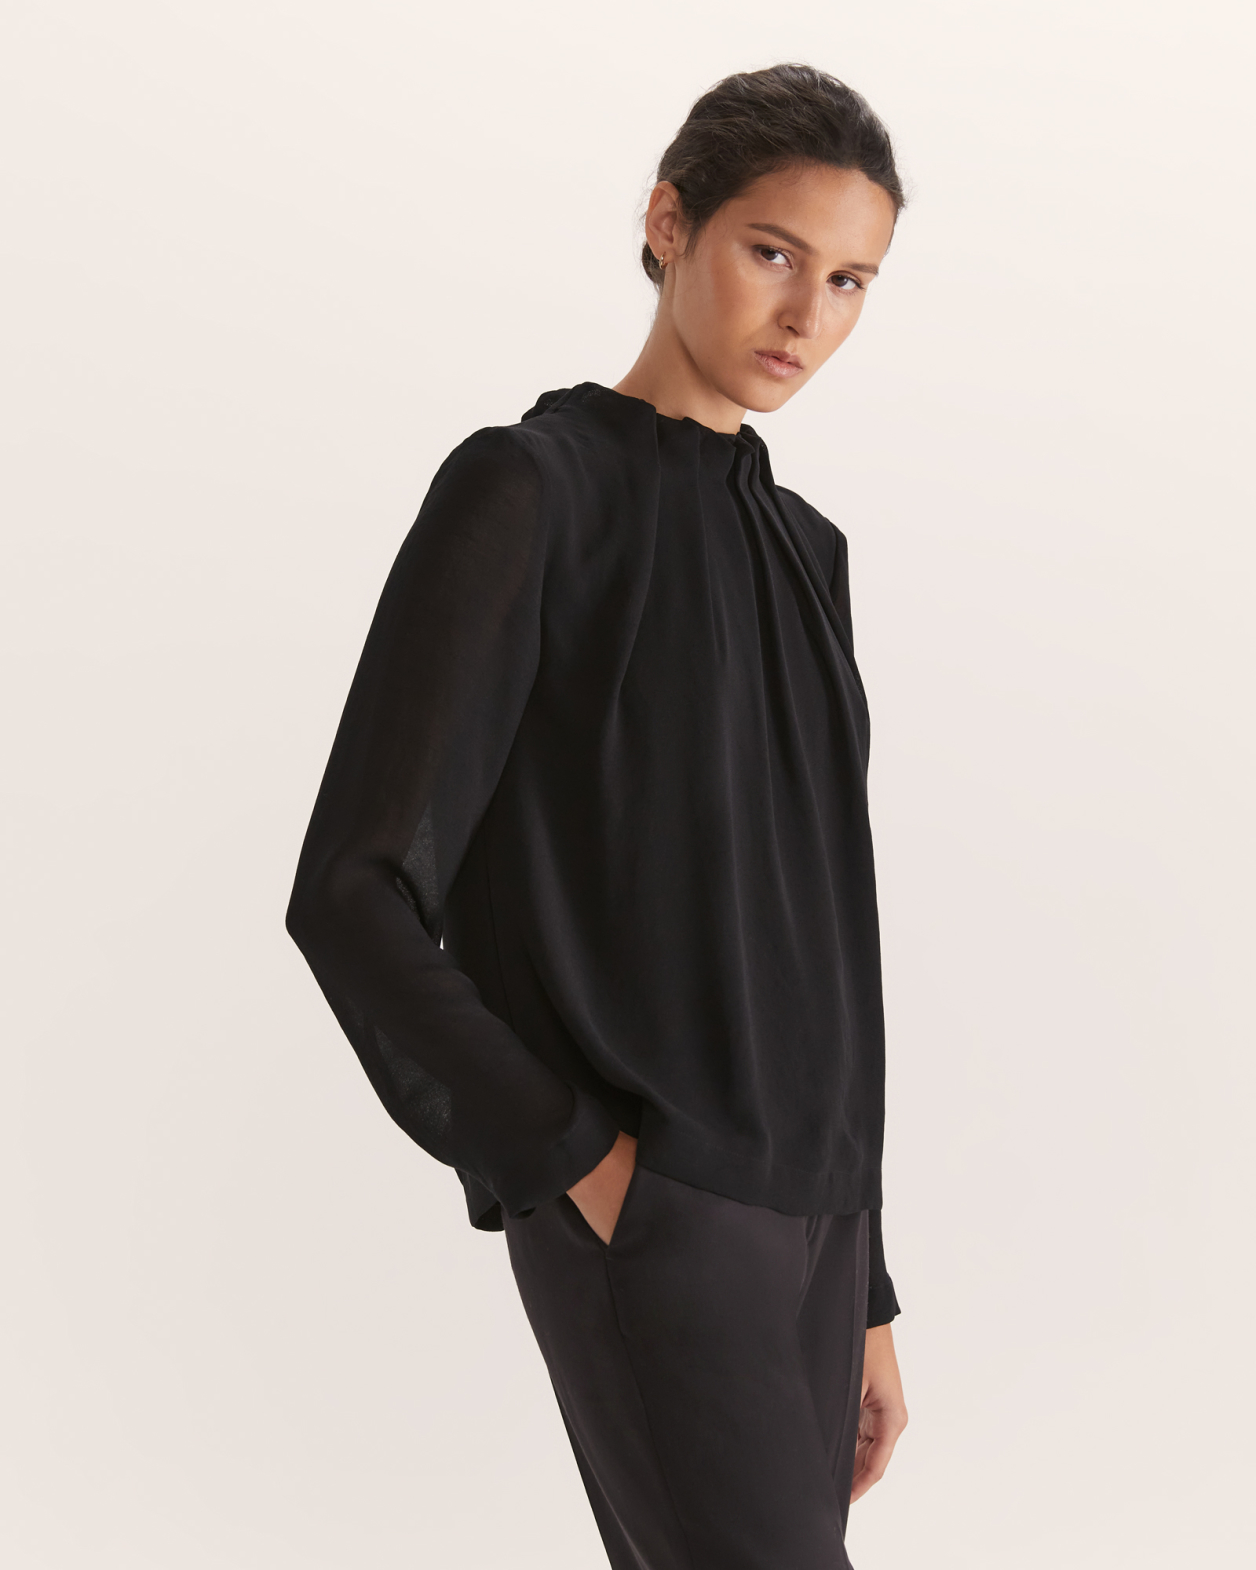 Willa High Neck Long Sleeve Top in BLACK